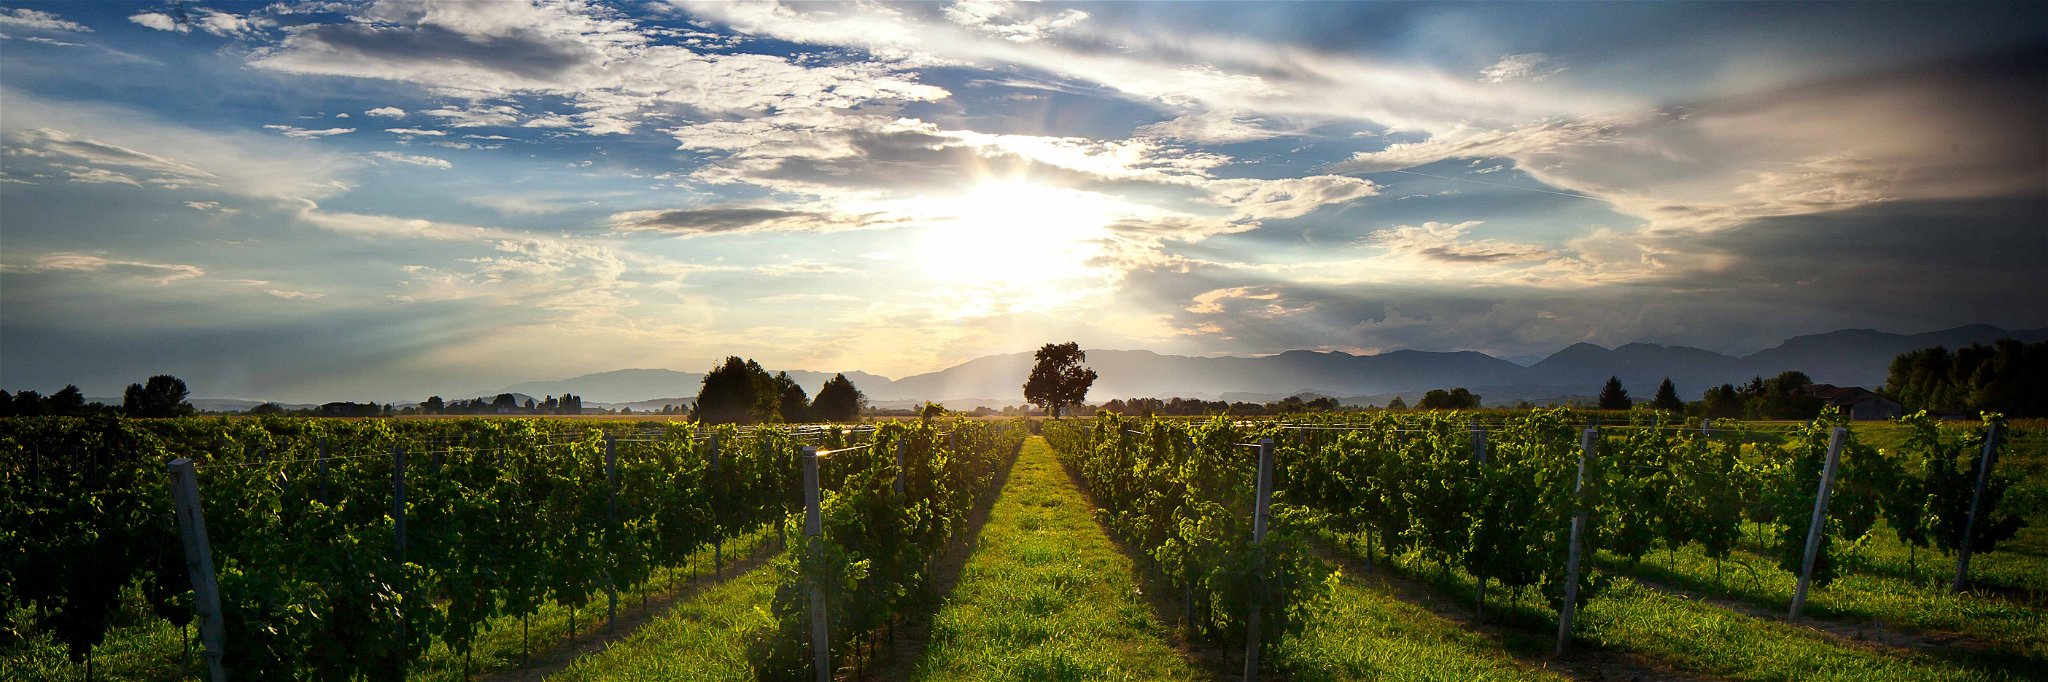 The production area for Prosecco DOC stretches from Vicenza in Veneto to Trieste in Friuli.